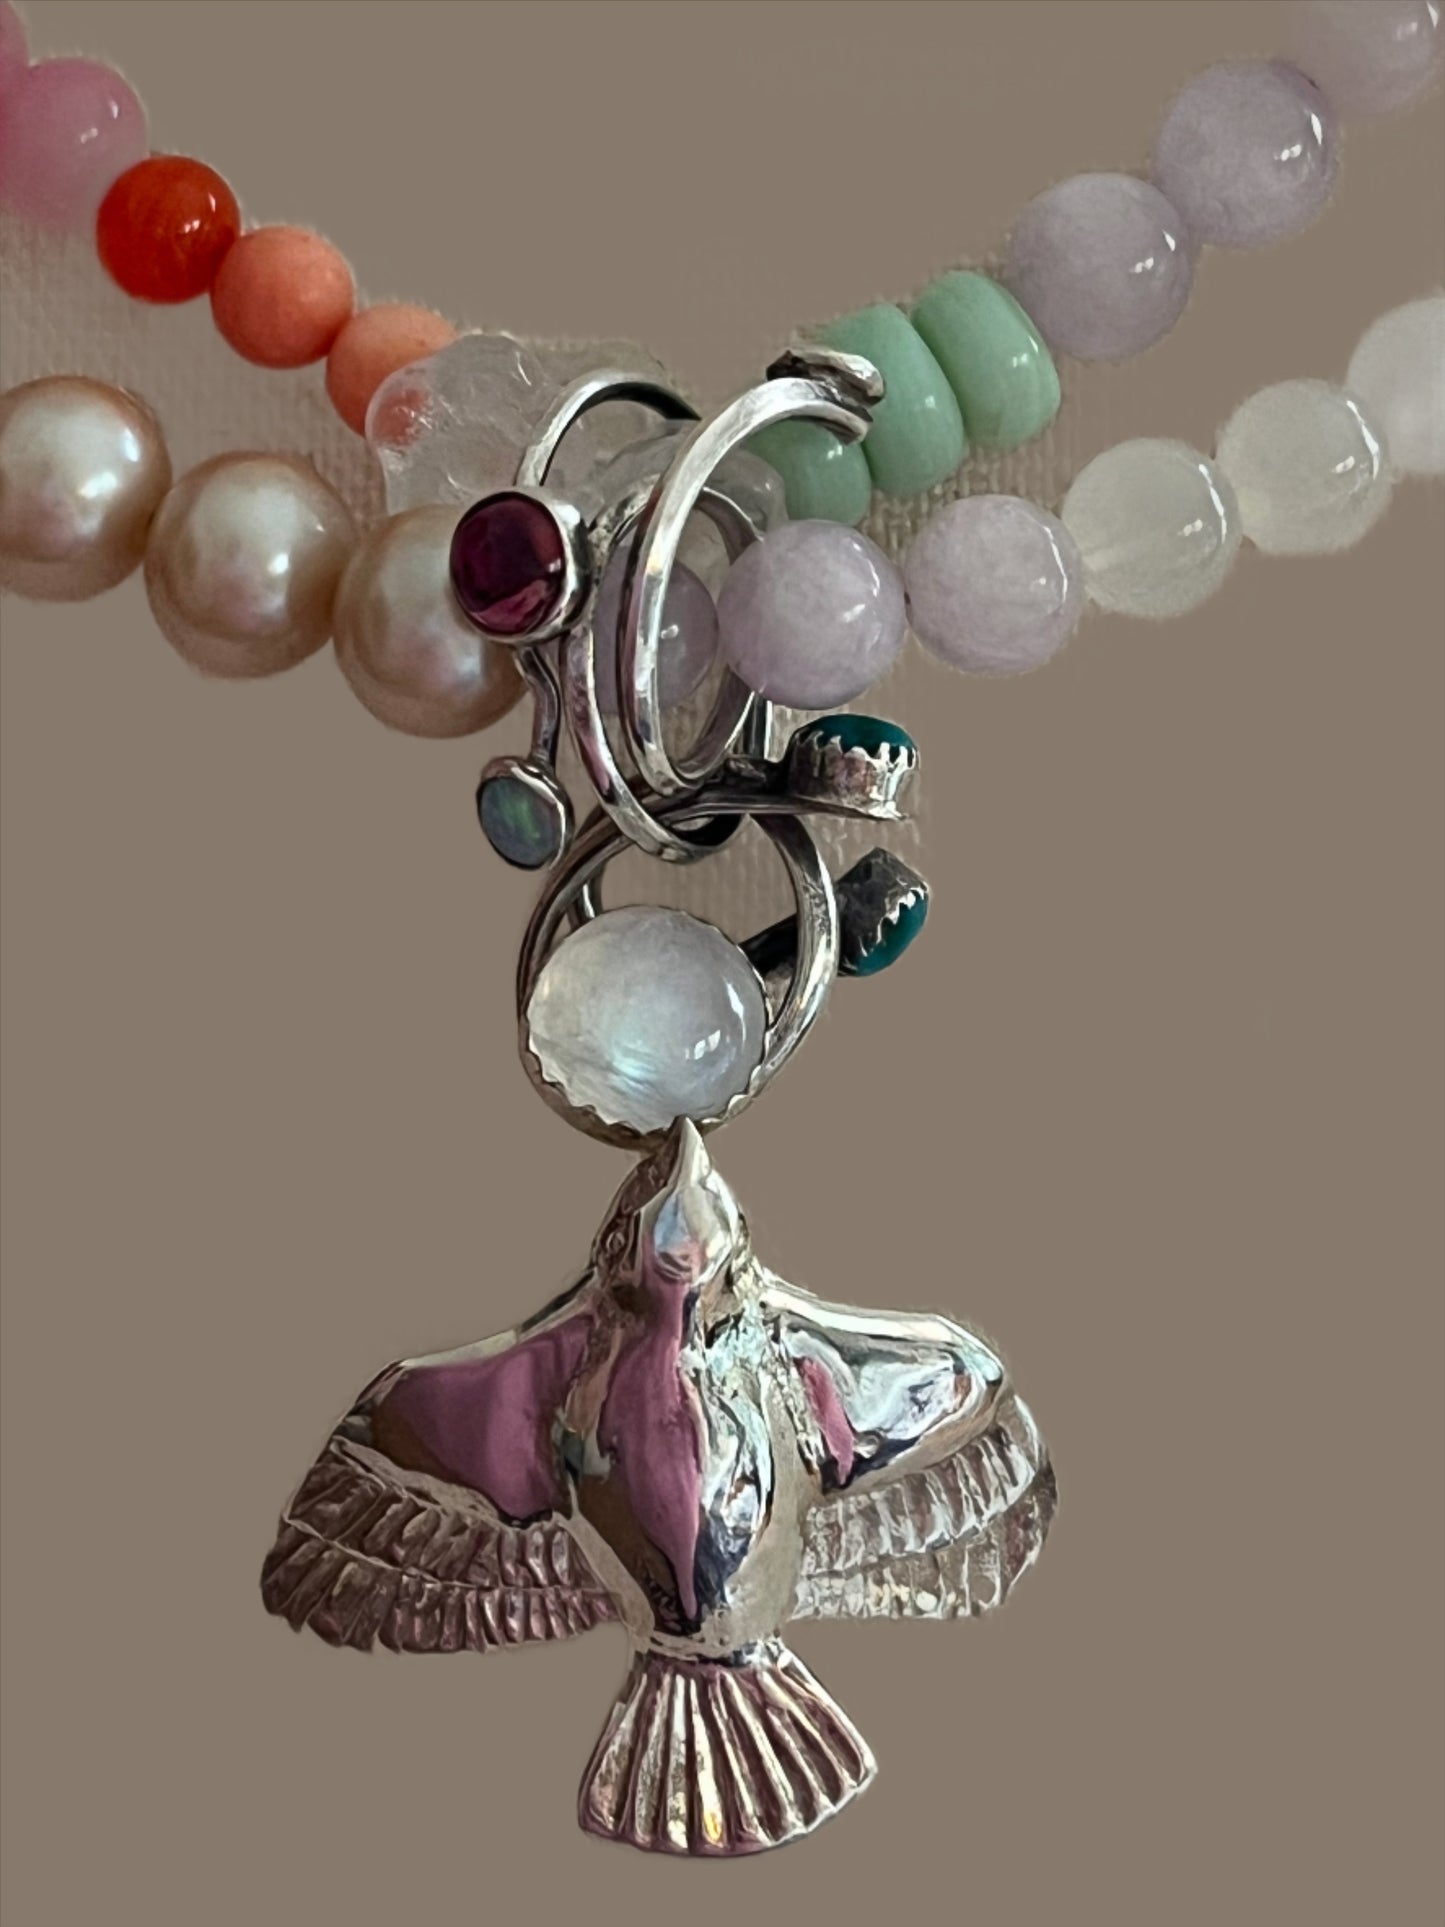 Mystical Magical Bird and Beads necklace